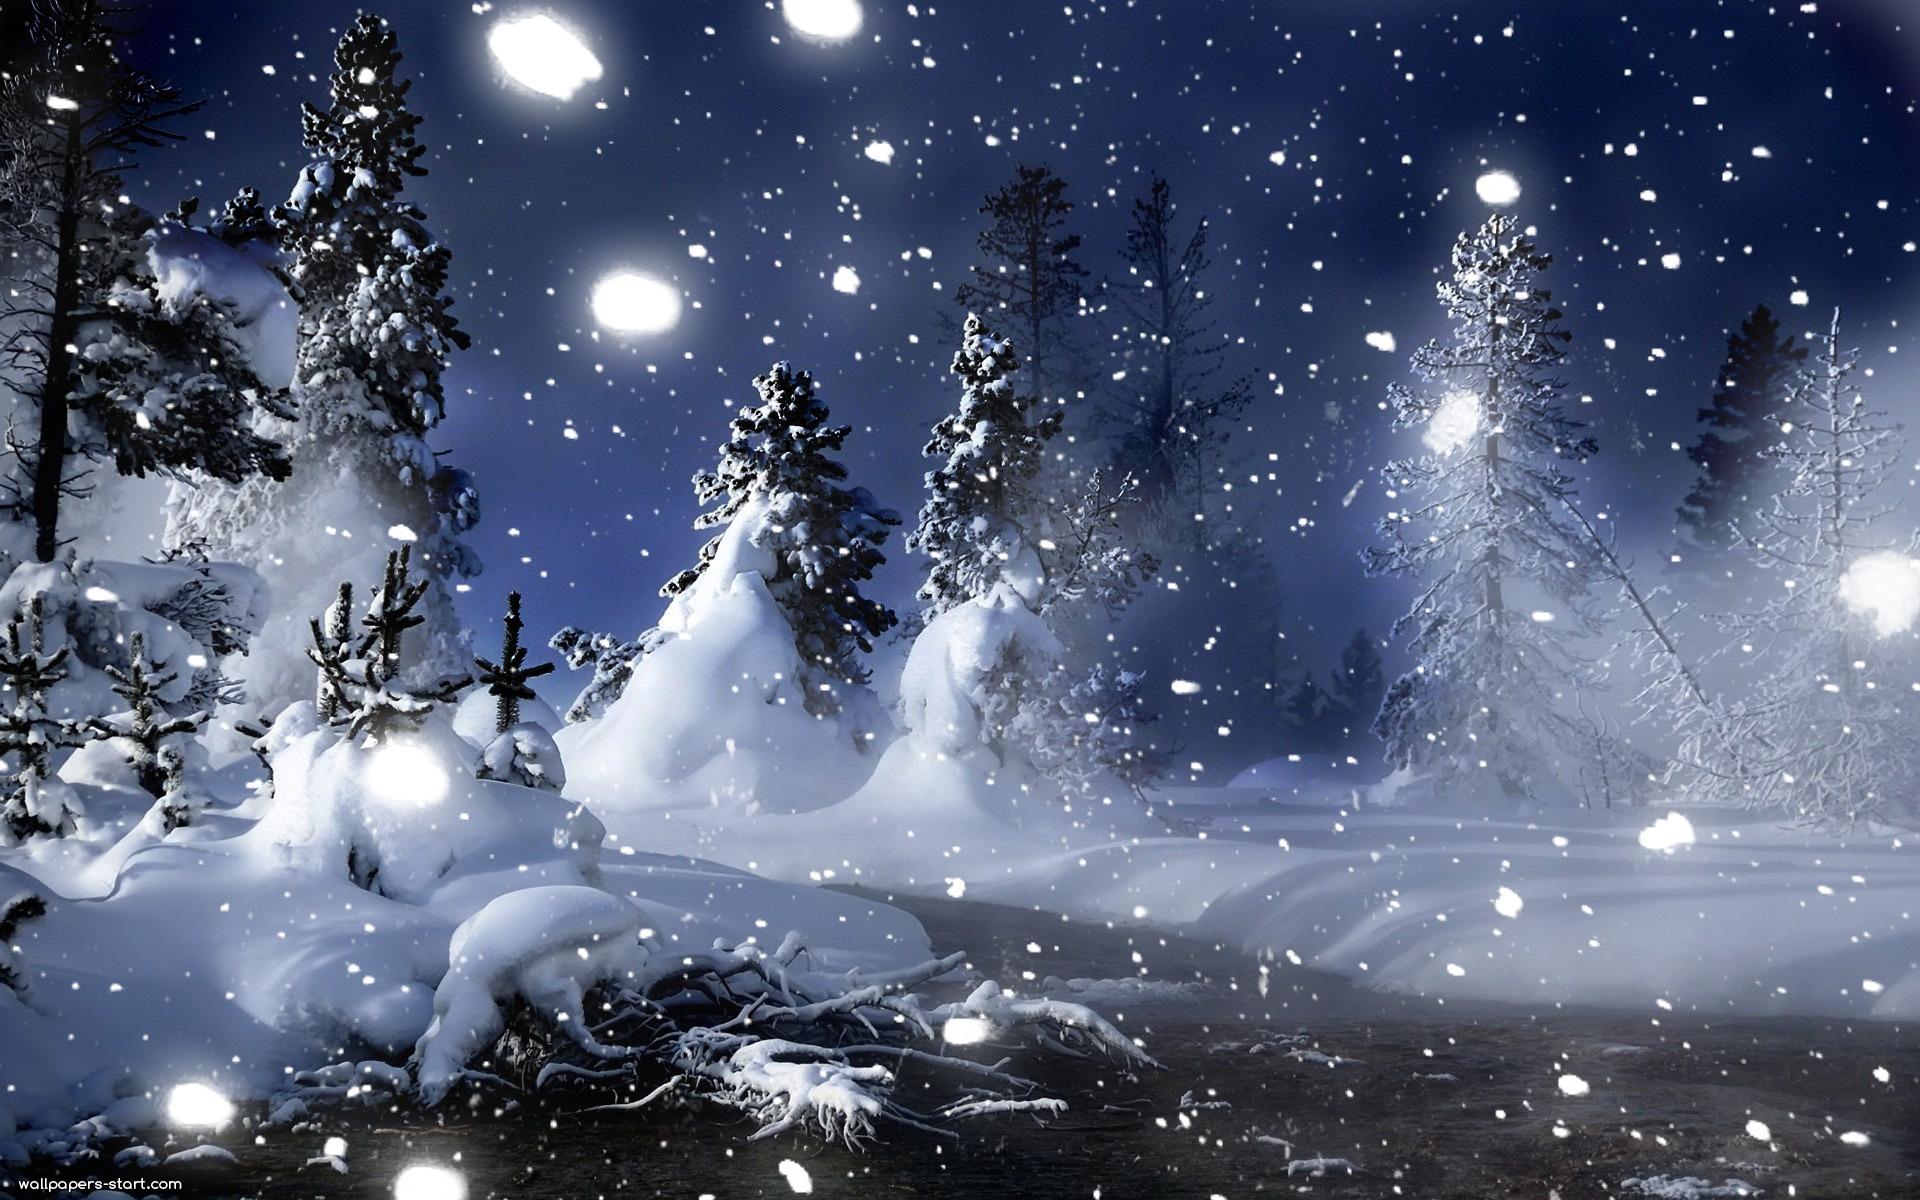 Magical Winter Forest Wallpaper, HD Magical Winter Forest Background on WallpaperBat